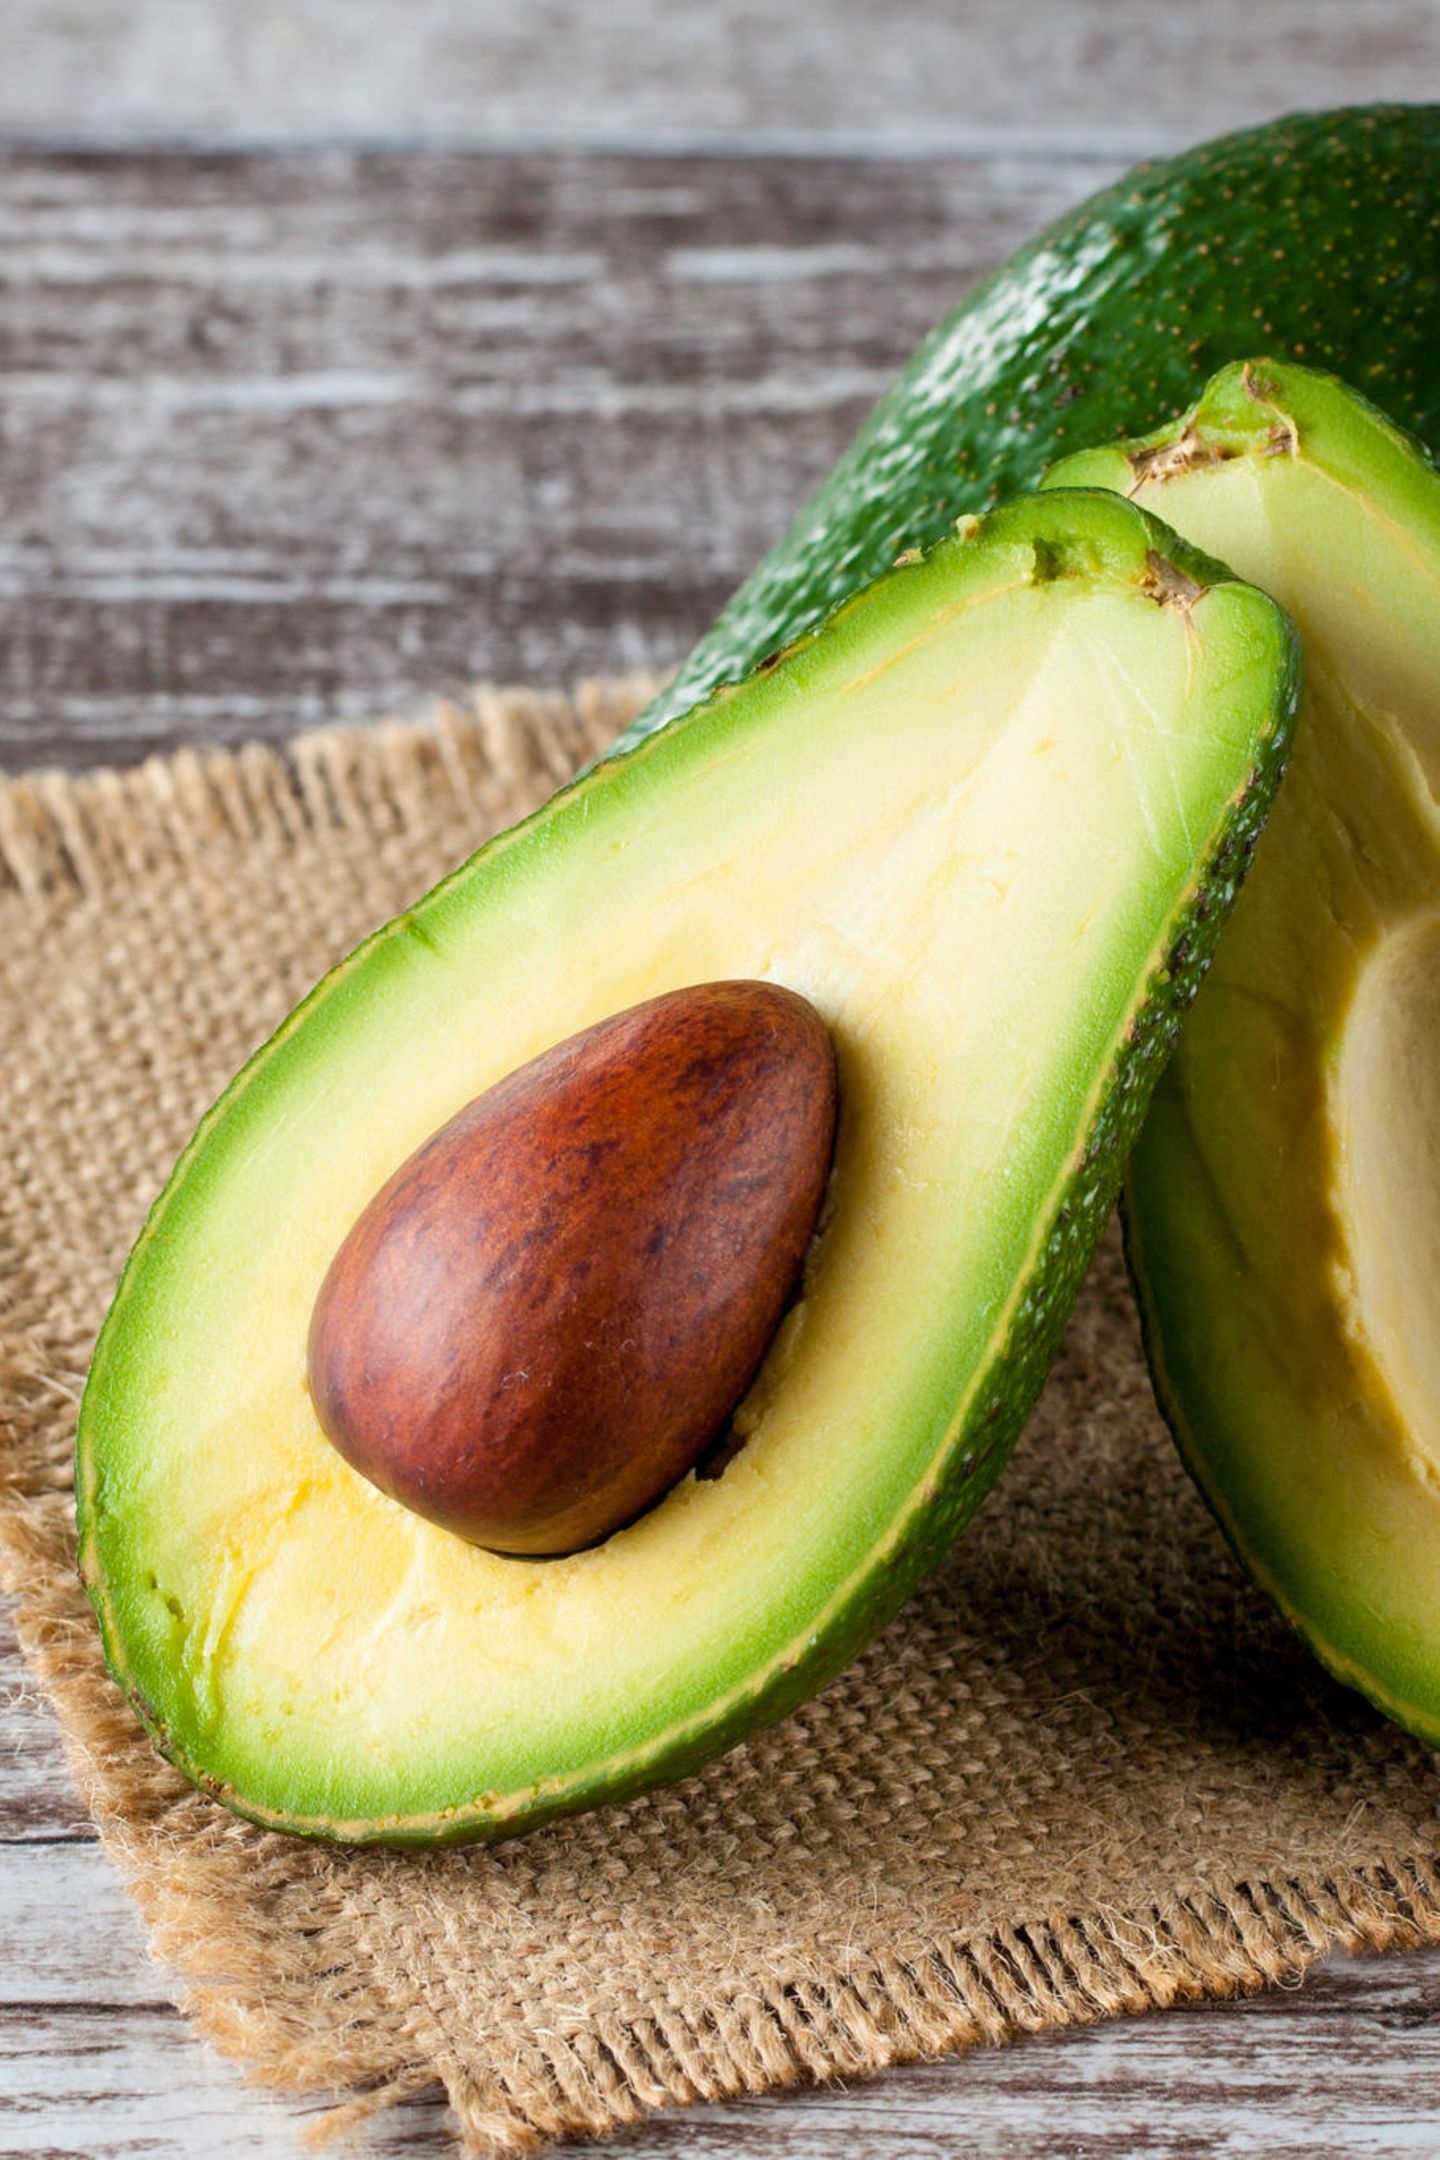 Avocado: Used in both savory and sweet dishes, Superfood. 1440x2160 HD Wallpaper.